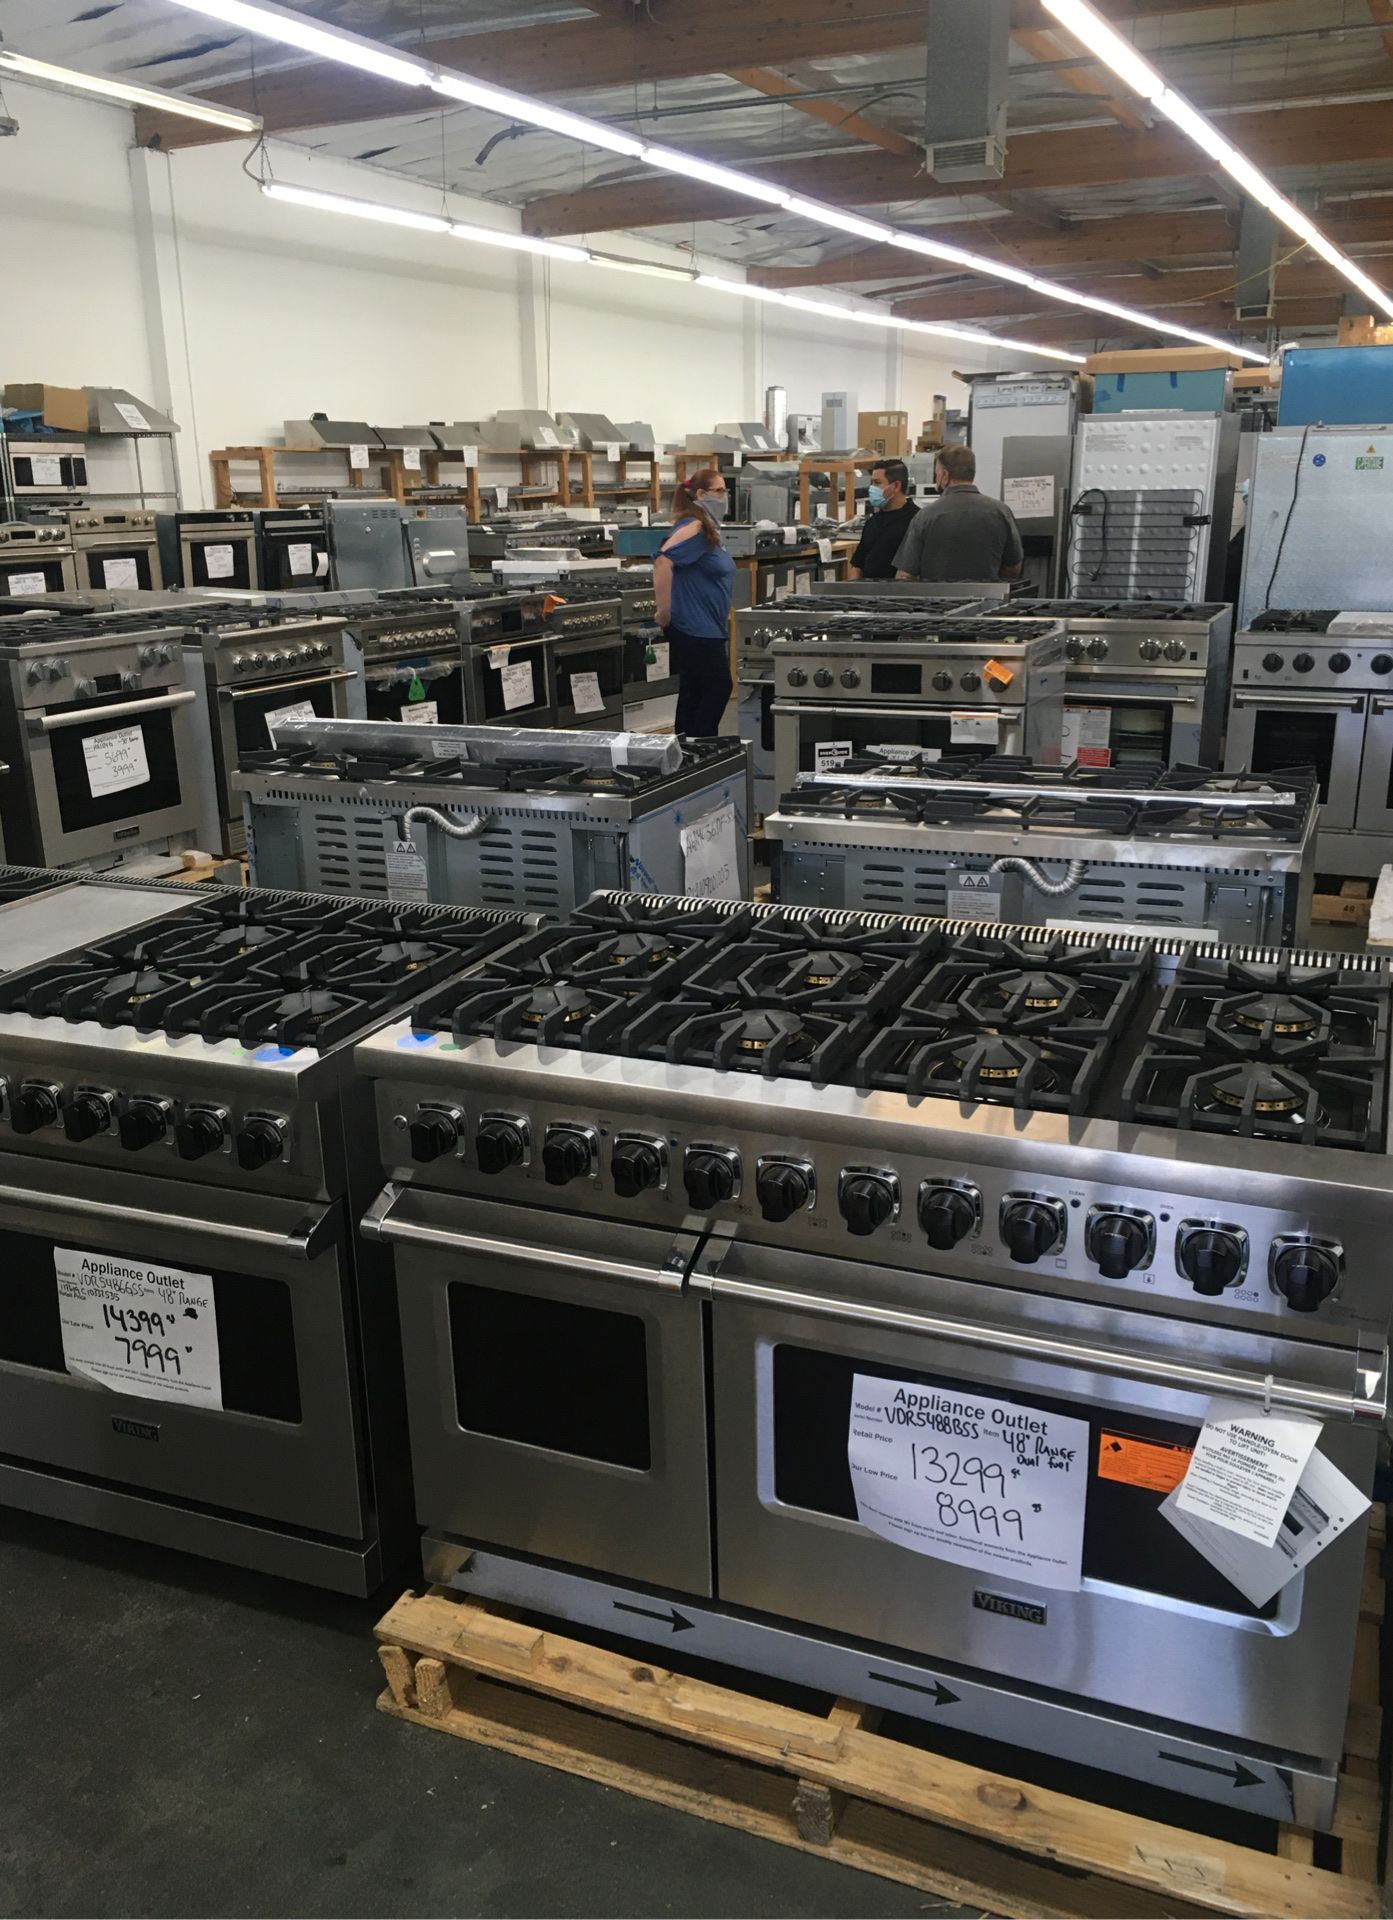 2 Day sales event !! Warehouse full high end luxury appliances